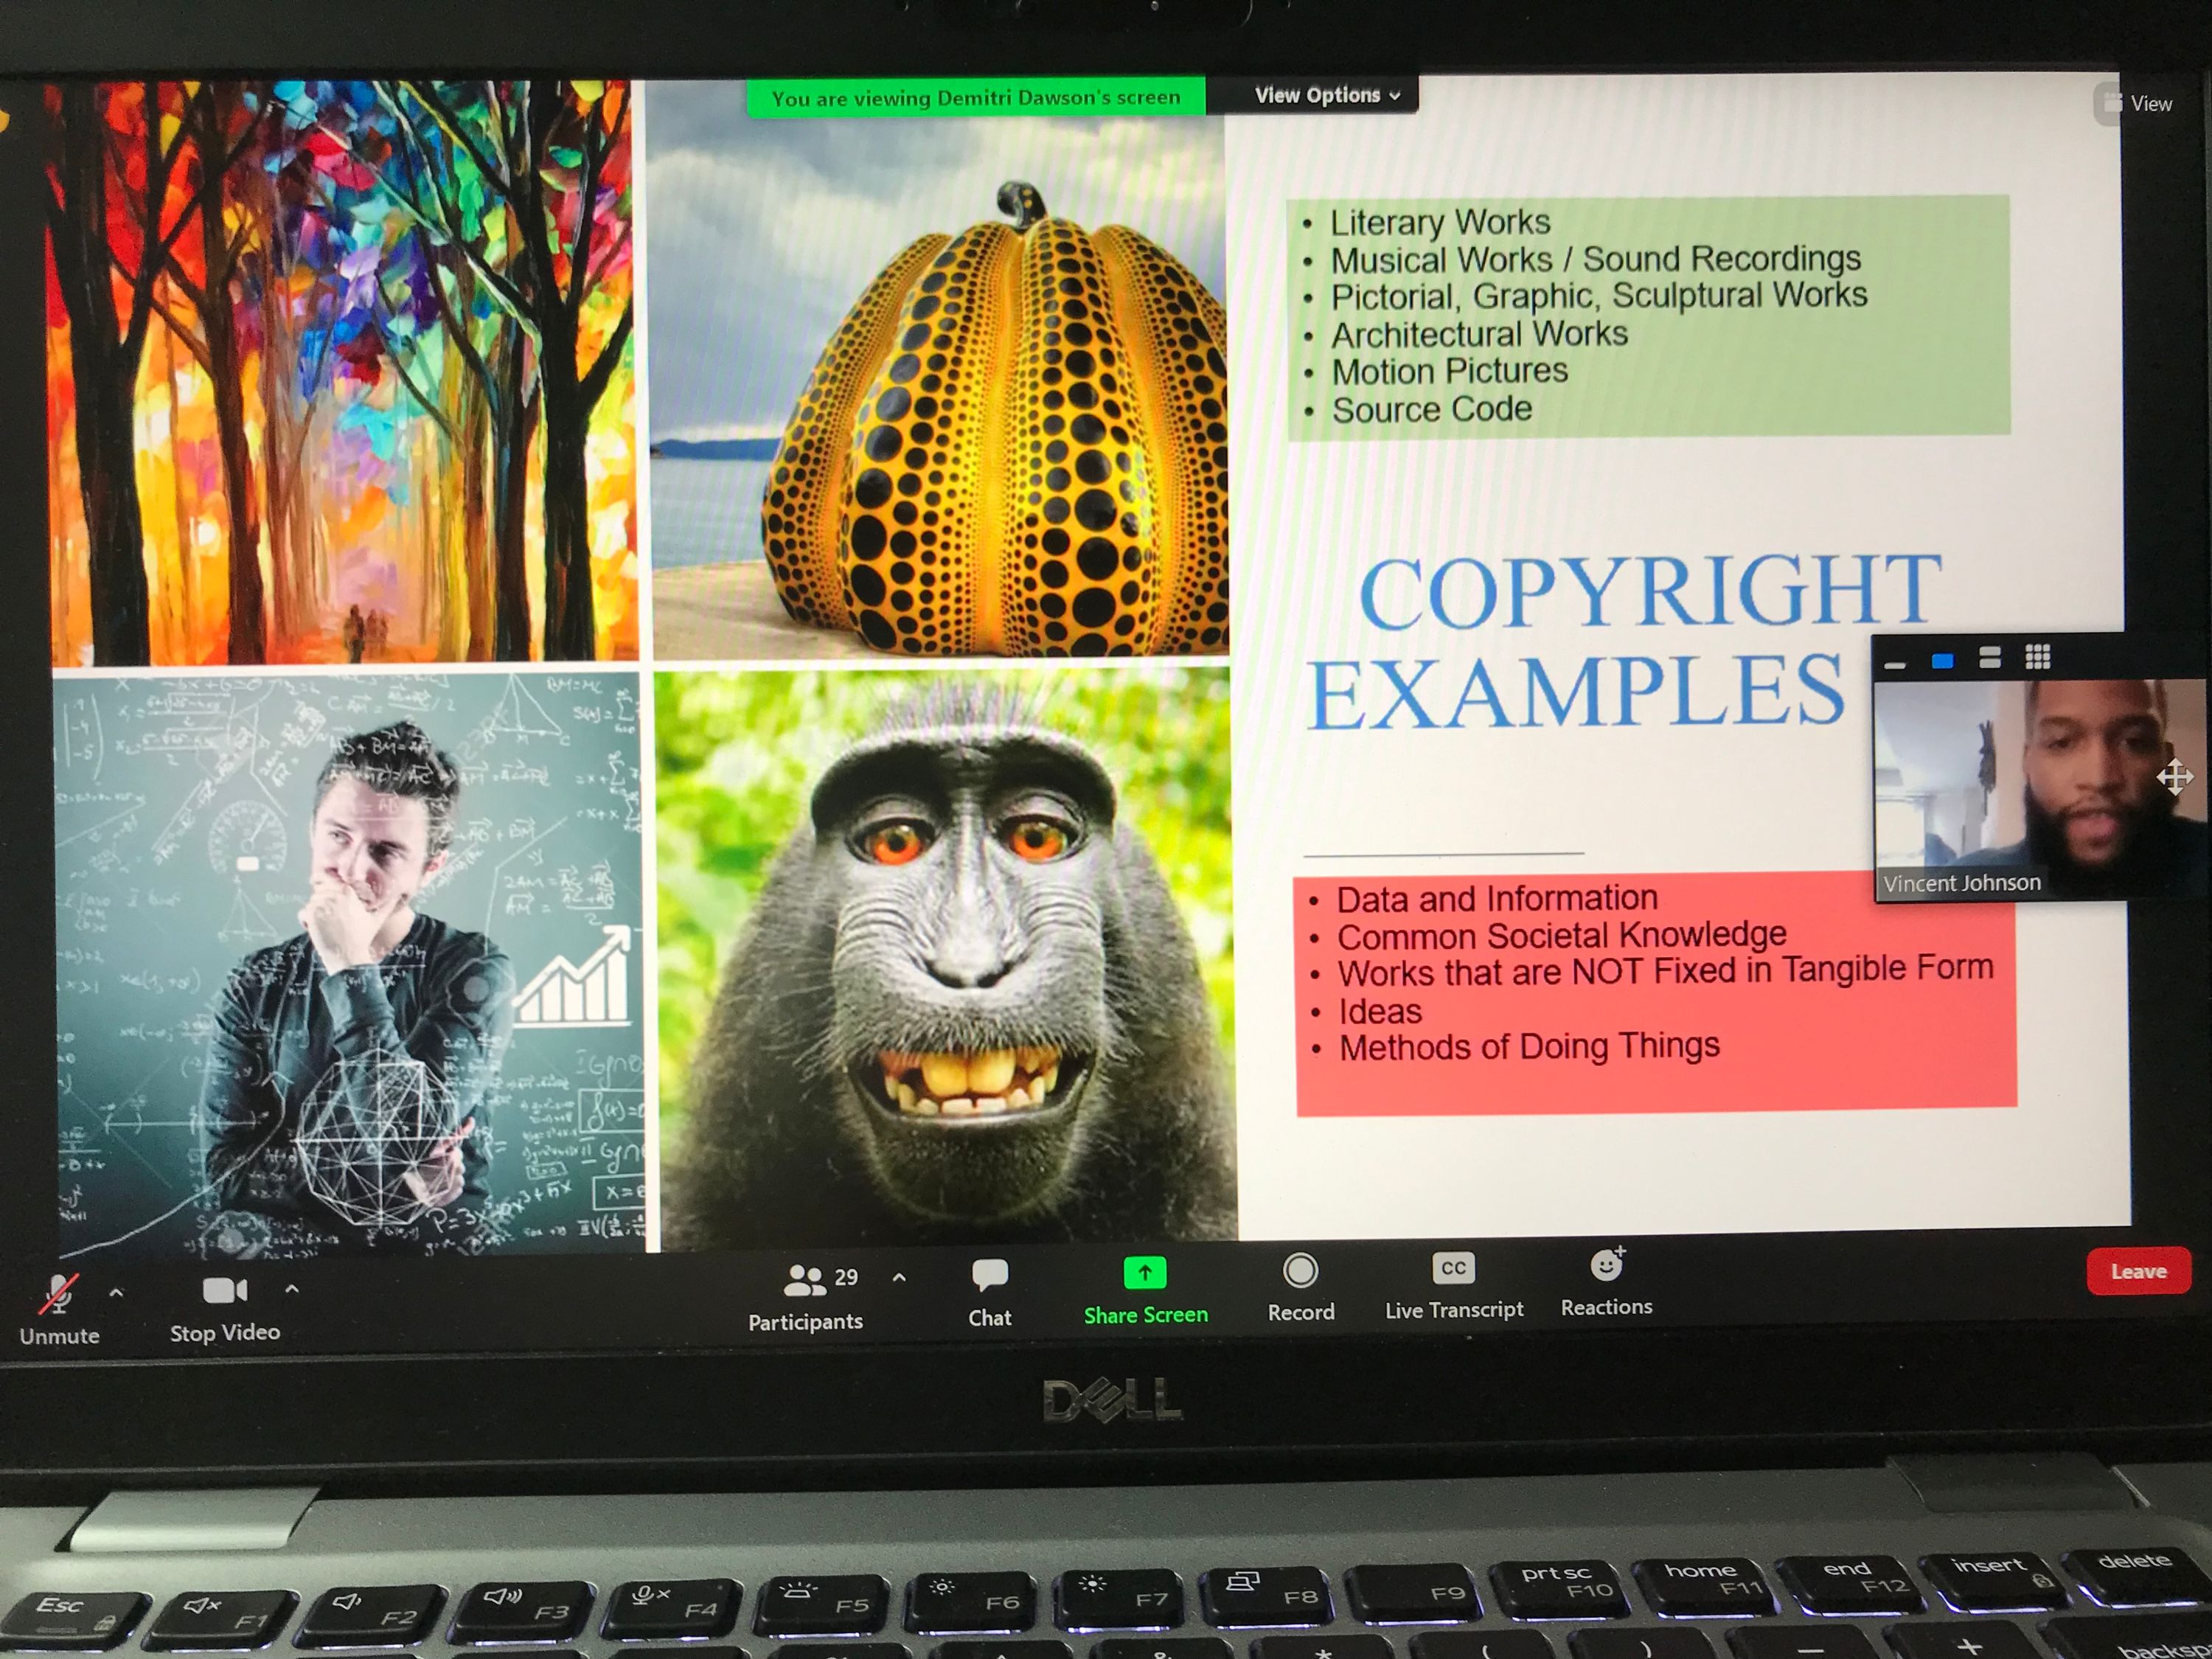 Slide showing examples of copyrighted works